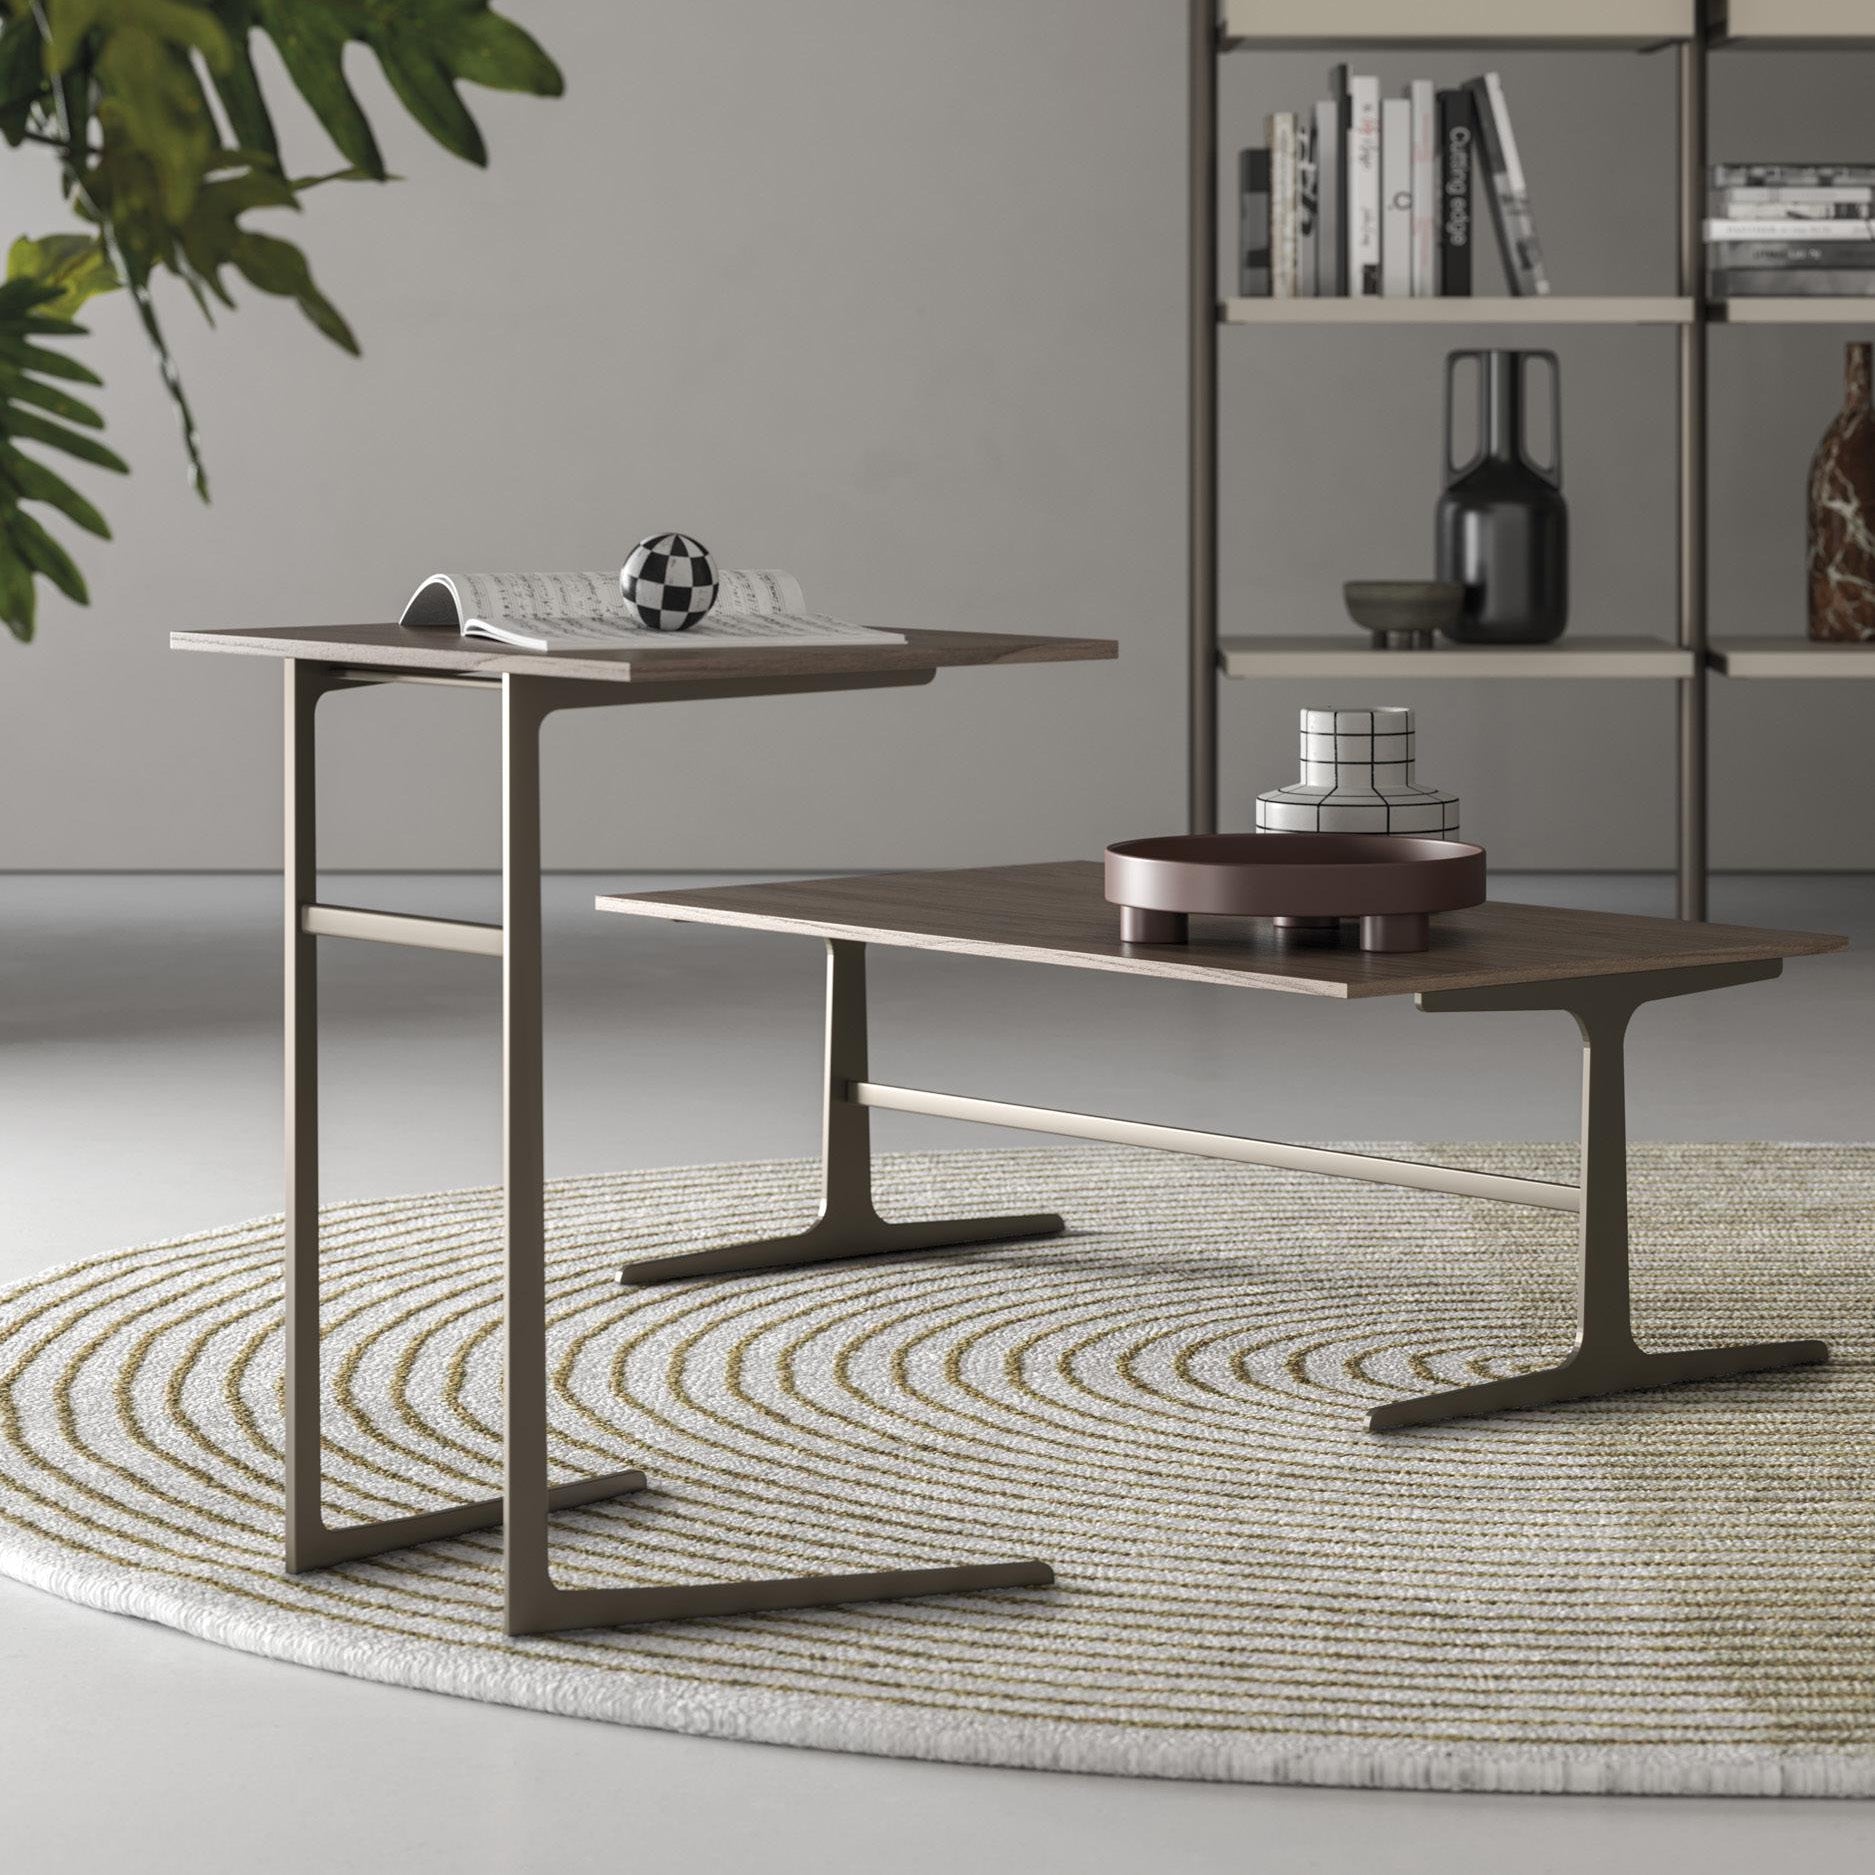 Lama 01-23 Coffee Table by Orme Design